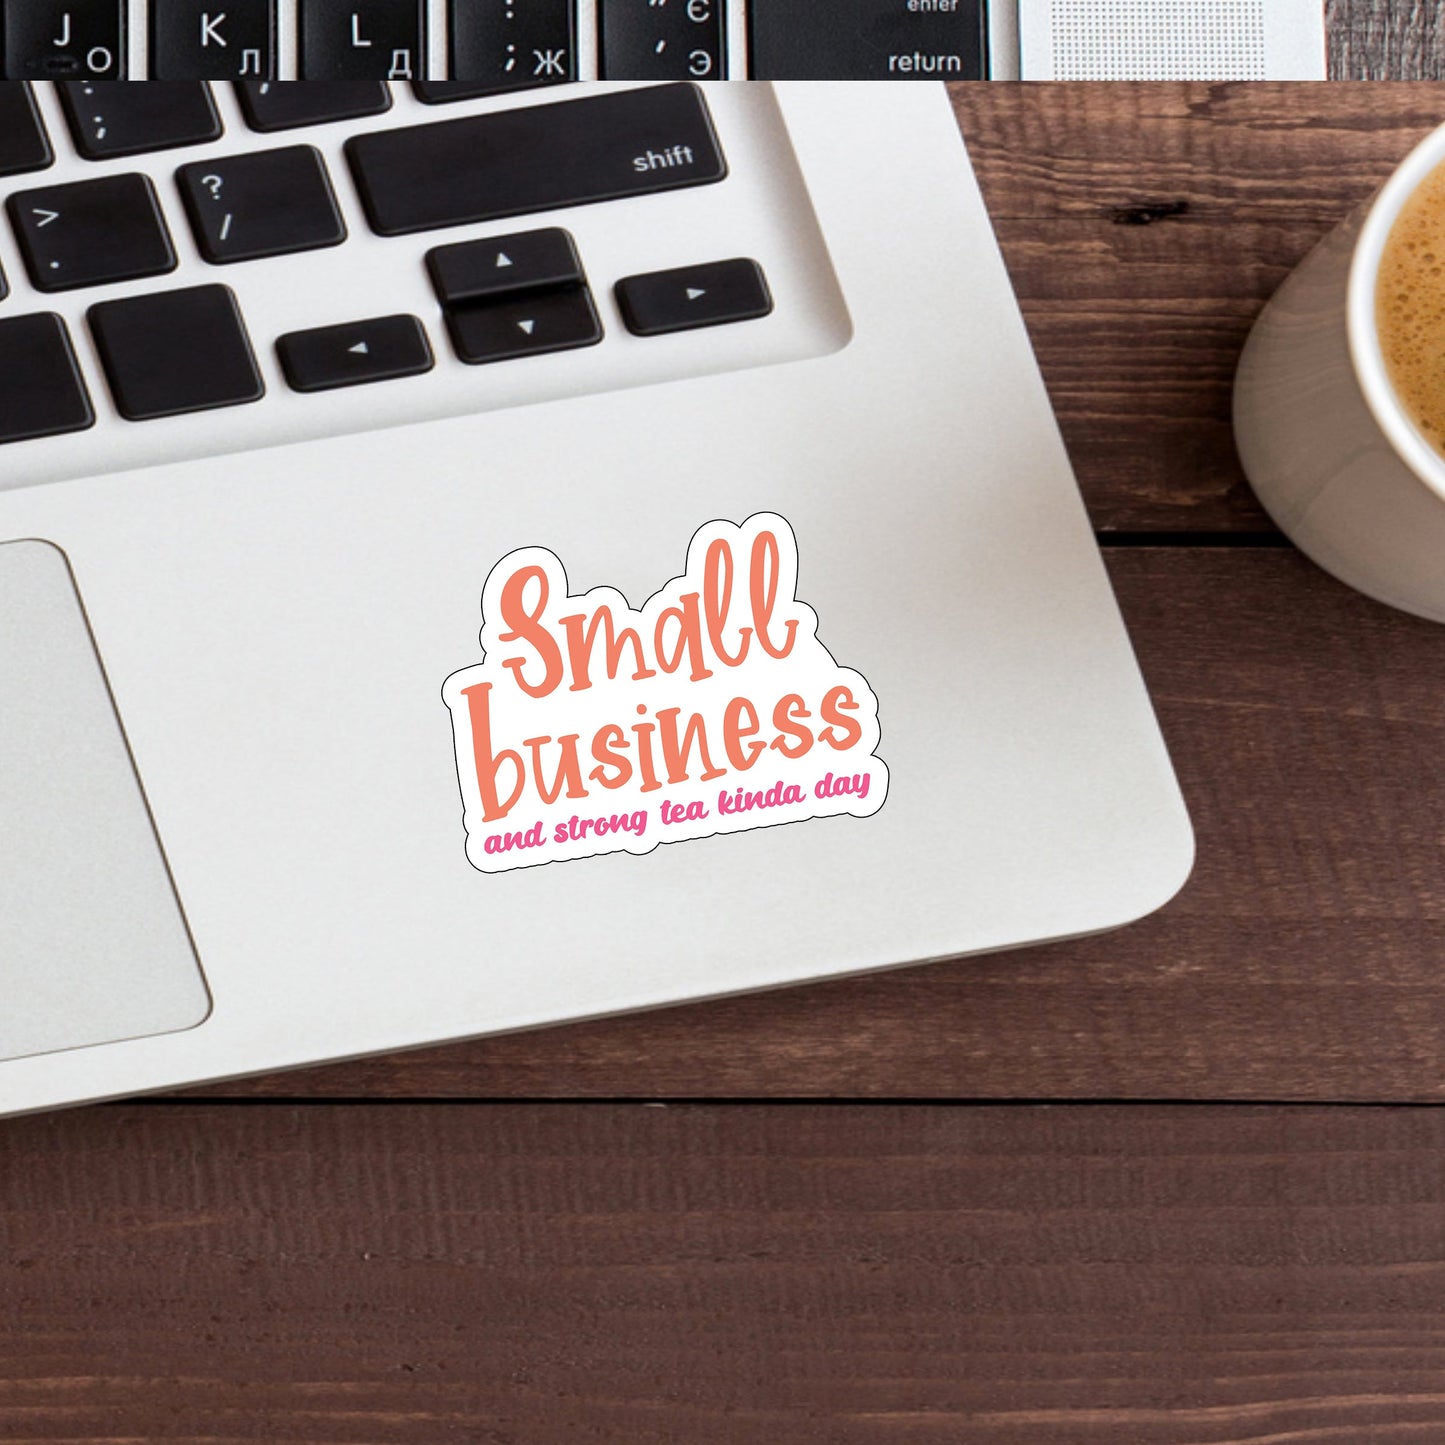 Small business and strong tea kind a day  Sticker,  Vinyl sticker, laptop sticker, Tablet sticker